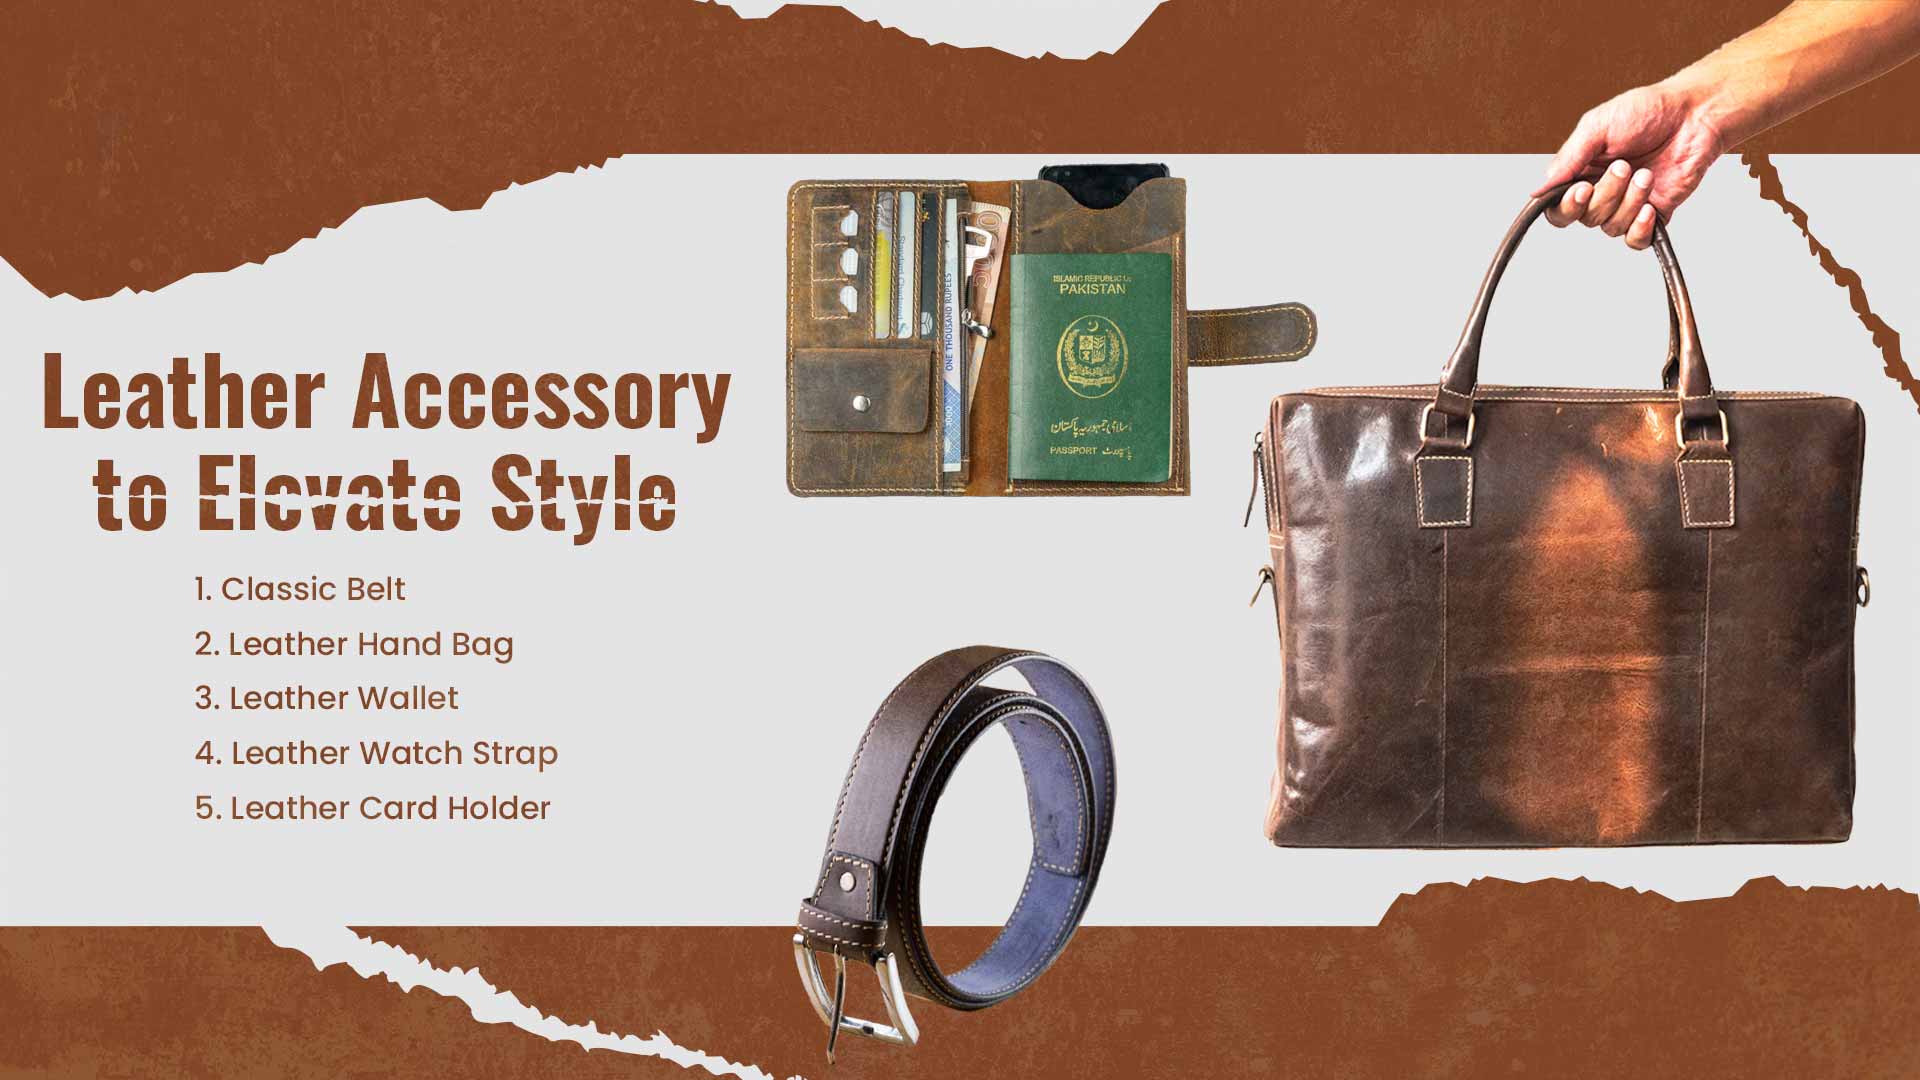 Top 5 Must-Have Leather Accessories to Elevate Your Style